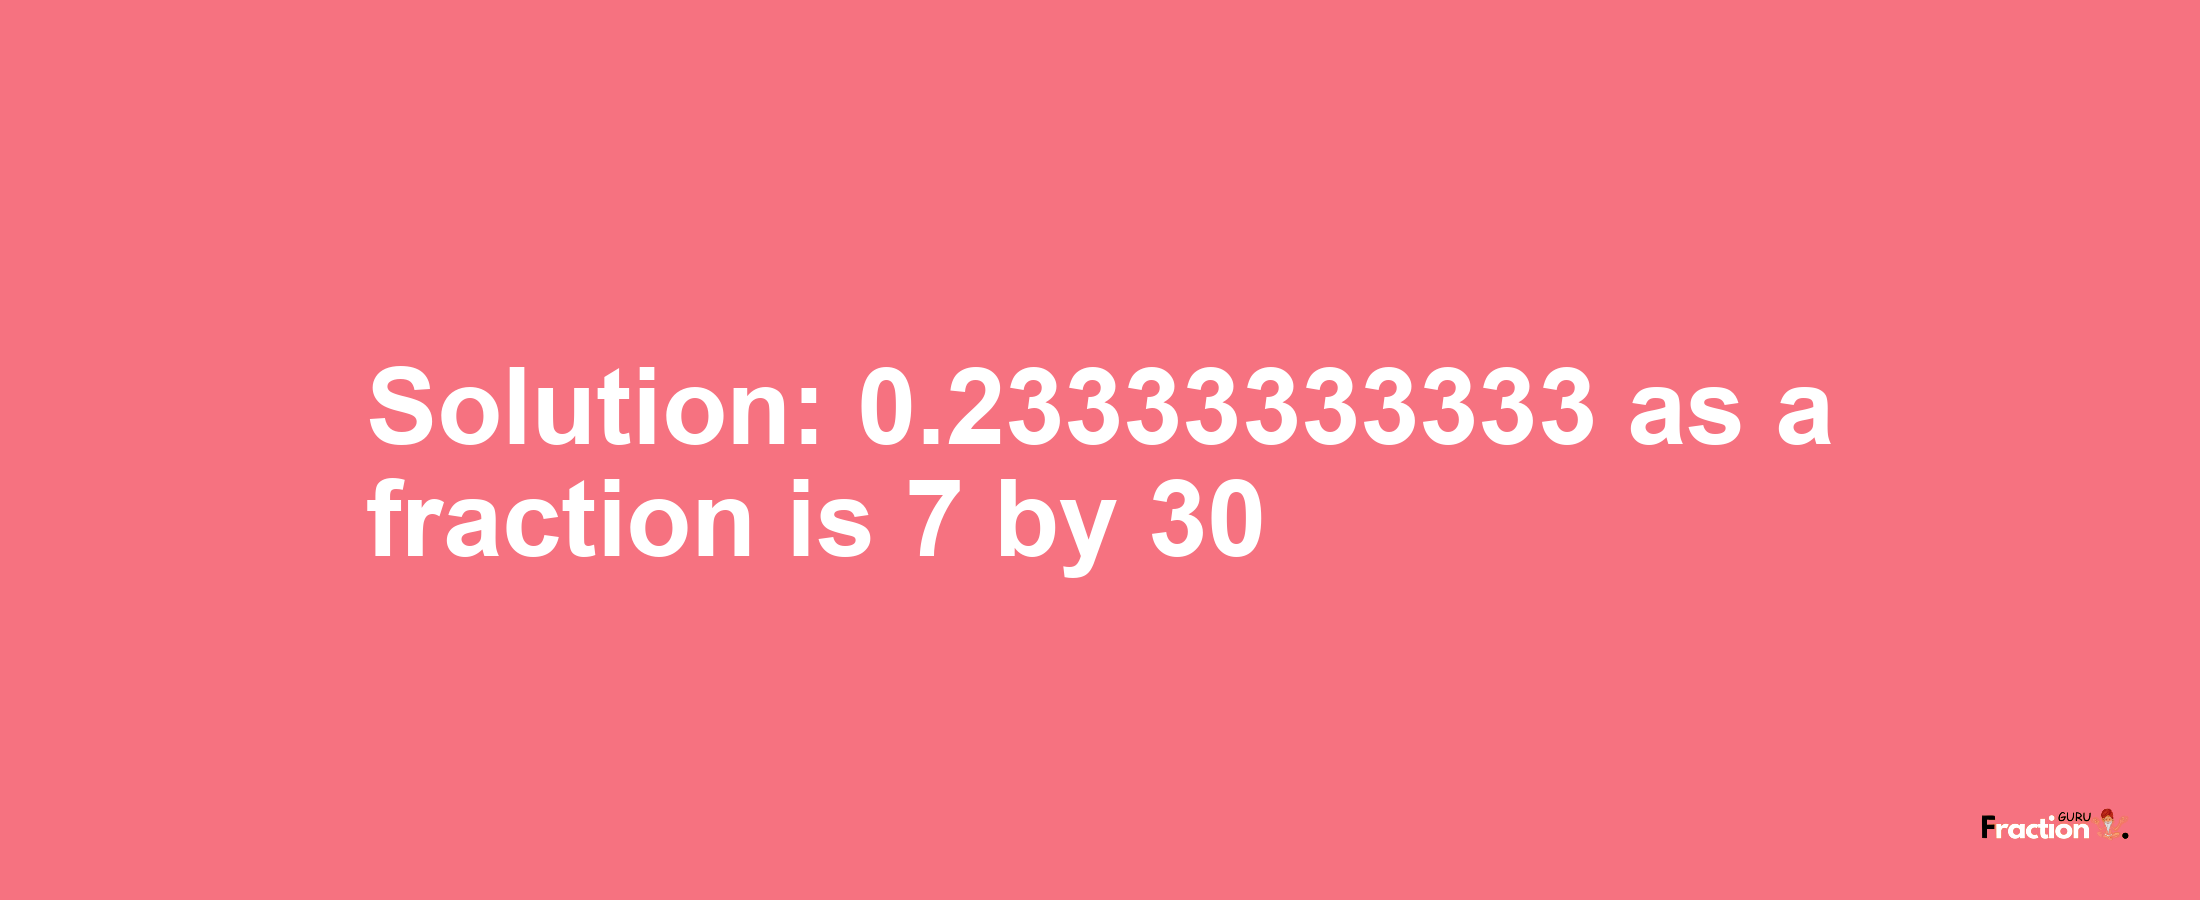 Solution:0.23333333333 as a fraction is 7/30